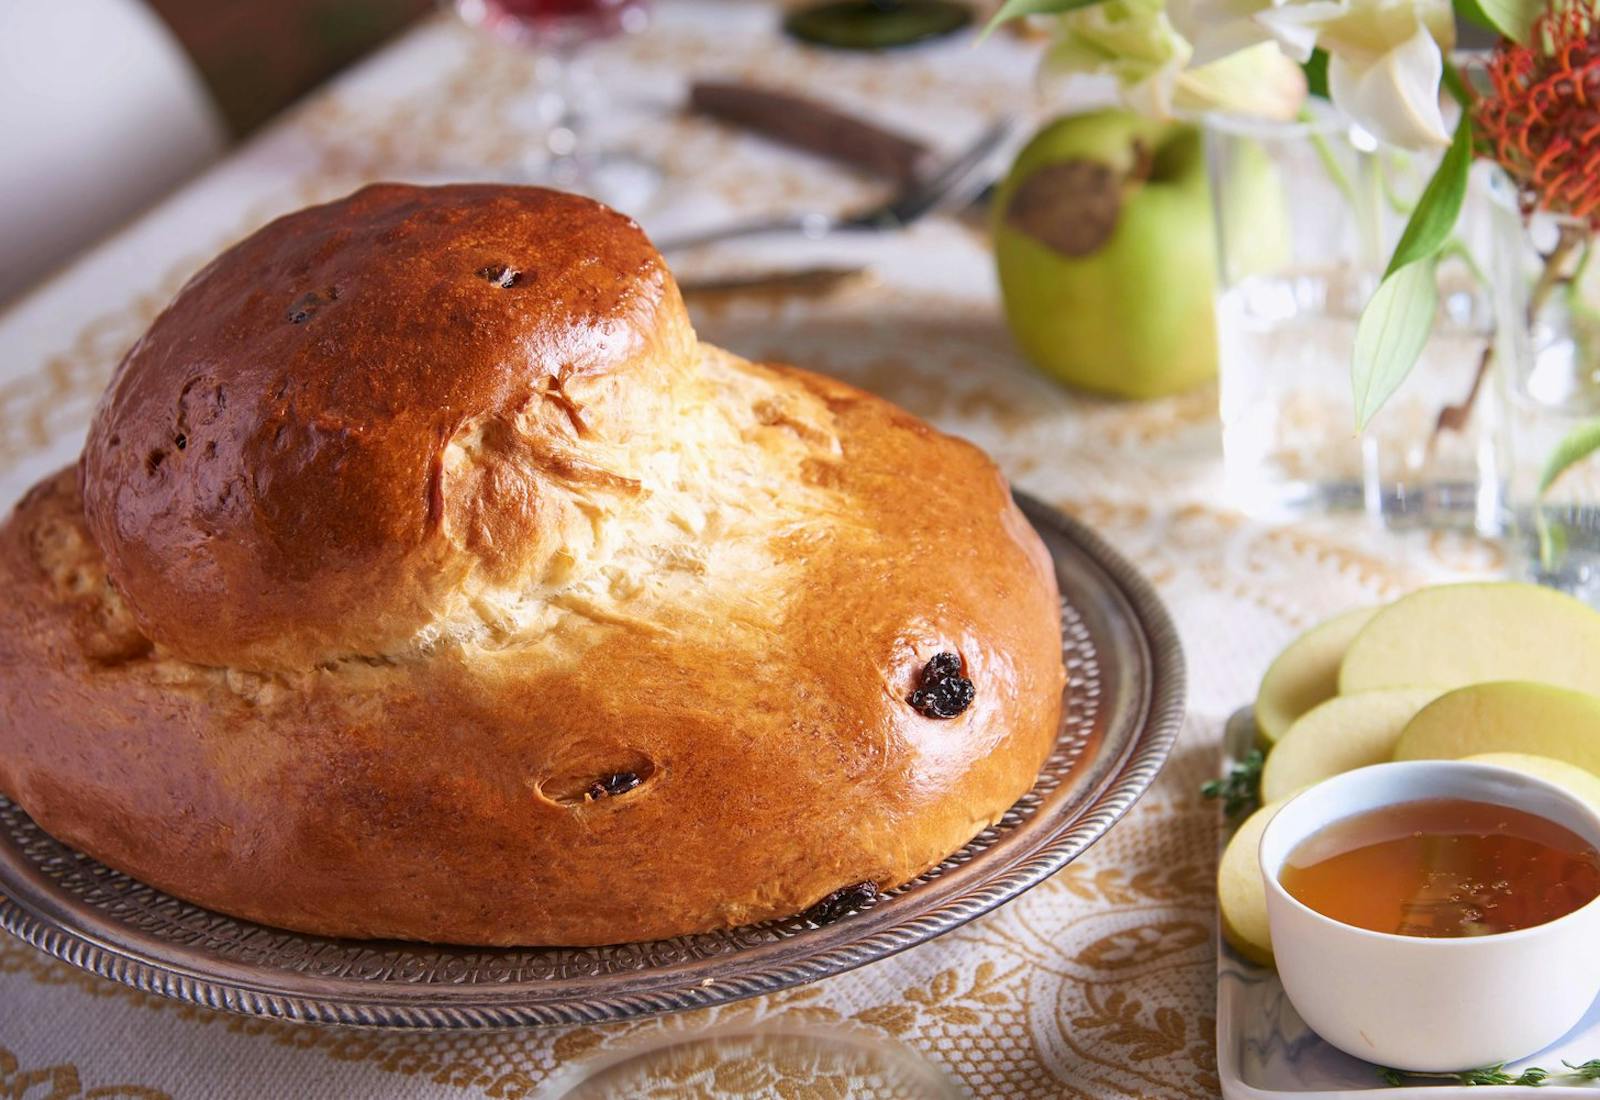 Round raisin challah on dining table alongside sliced green apples, a bowl of honey and fresh flowers.